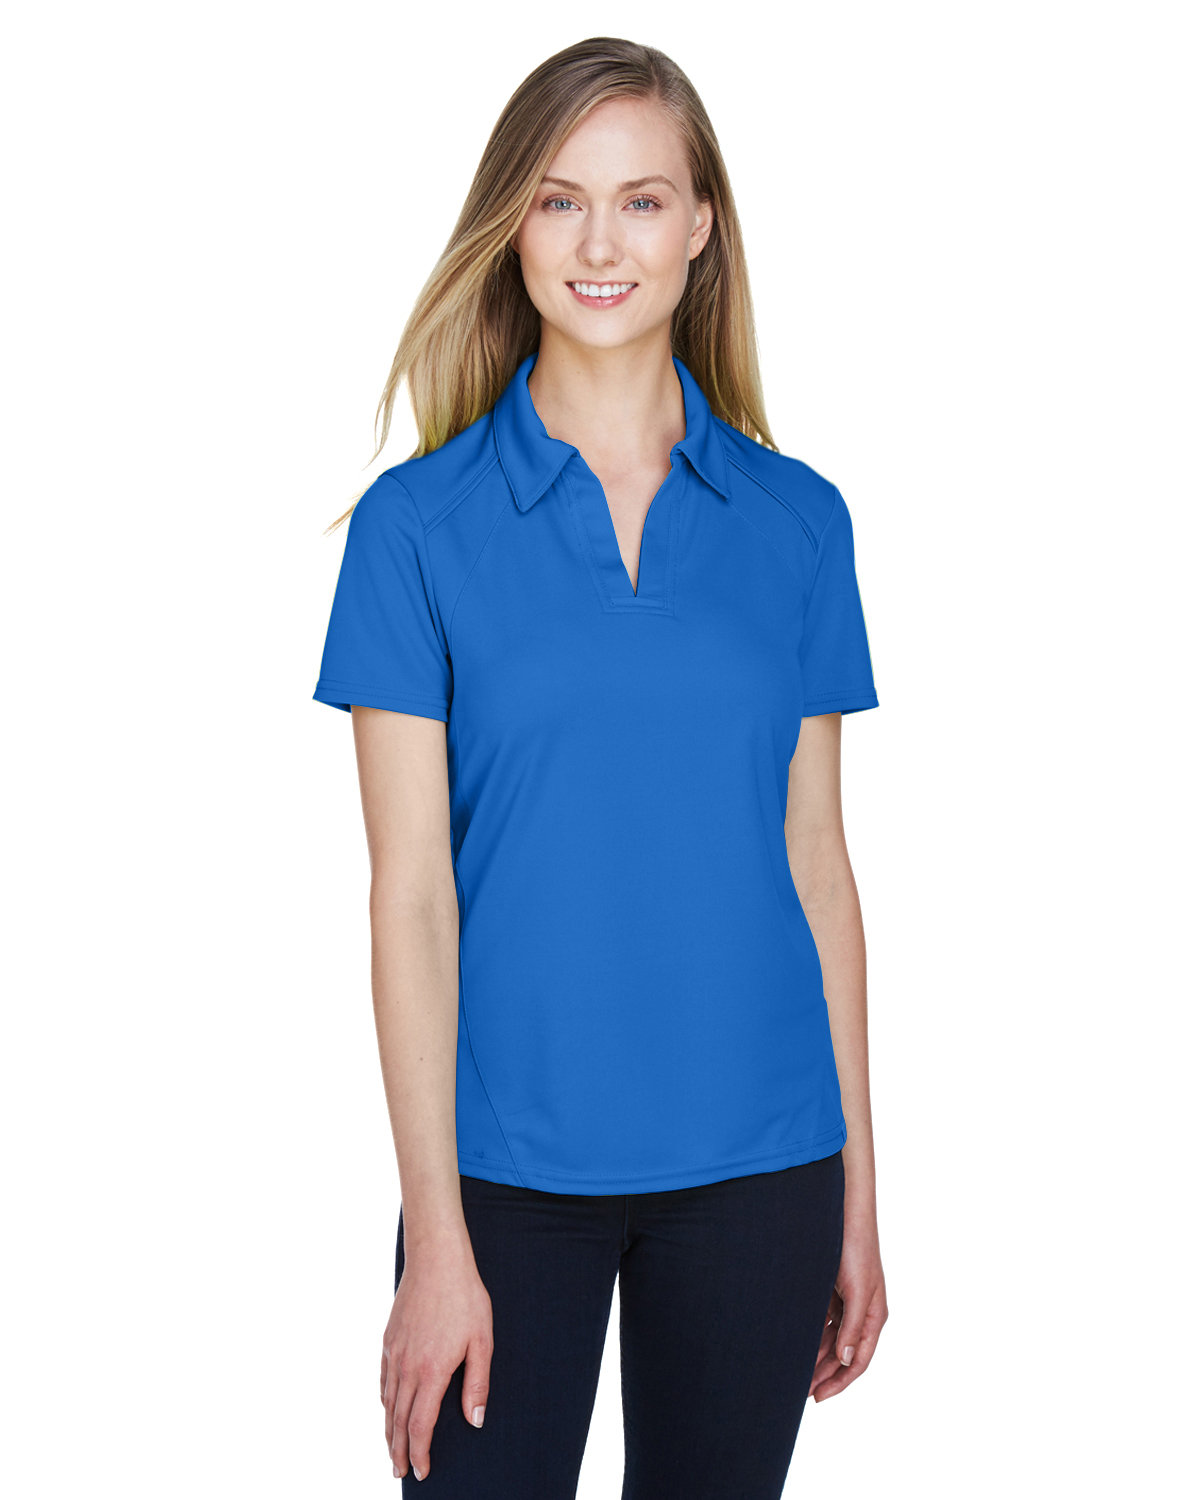 Polyester Piqué Recycled Performance alphabroder Ladies\' North End | Polo